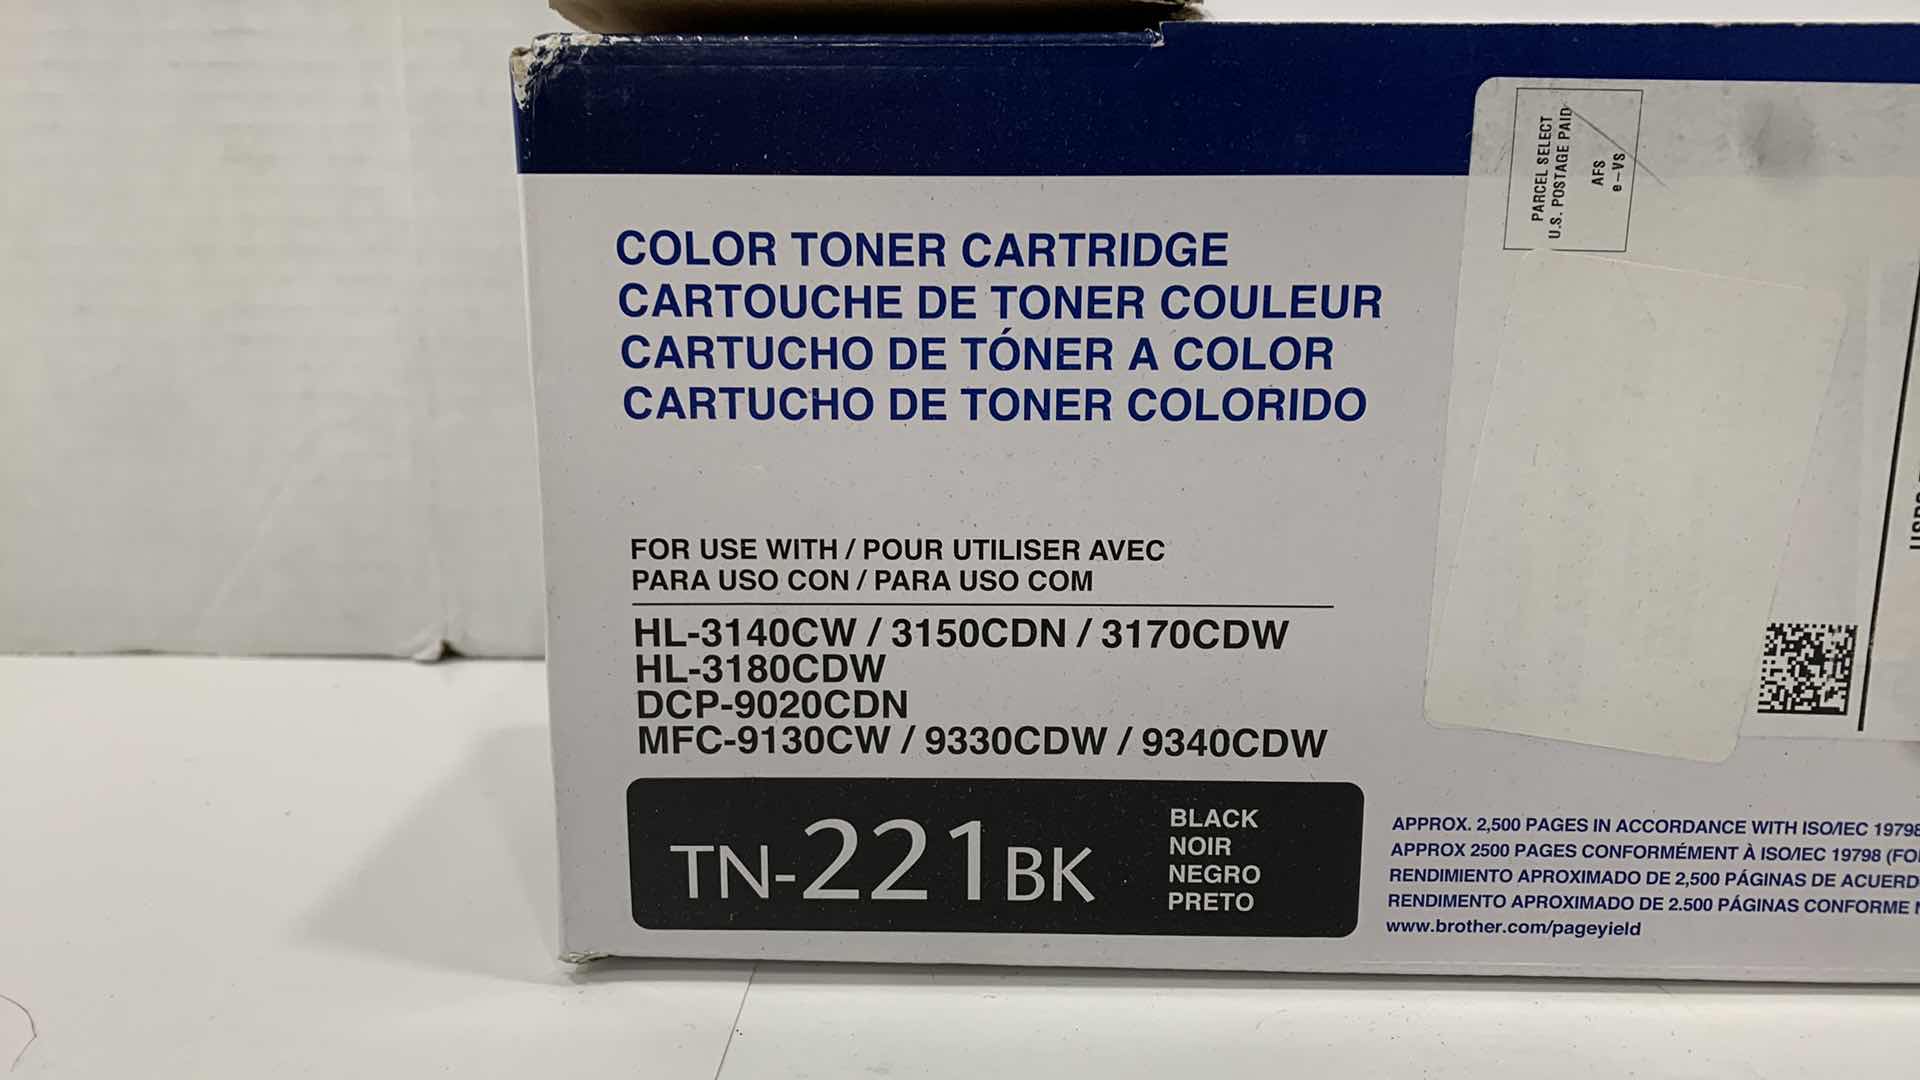 Photo 2 of BROTHER COLOR TONER CARTRIDGE TN-221 BK